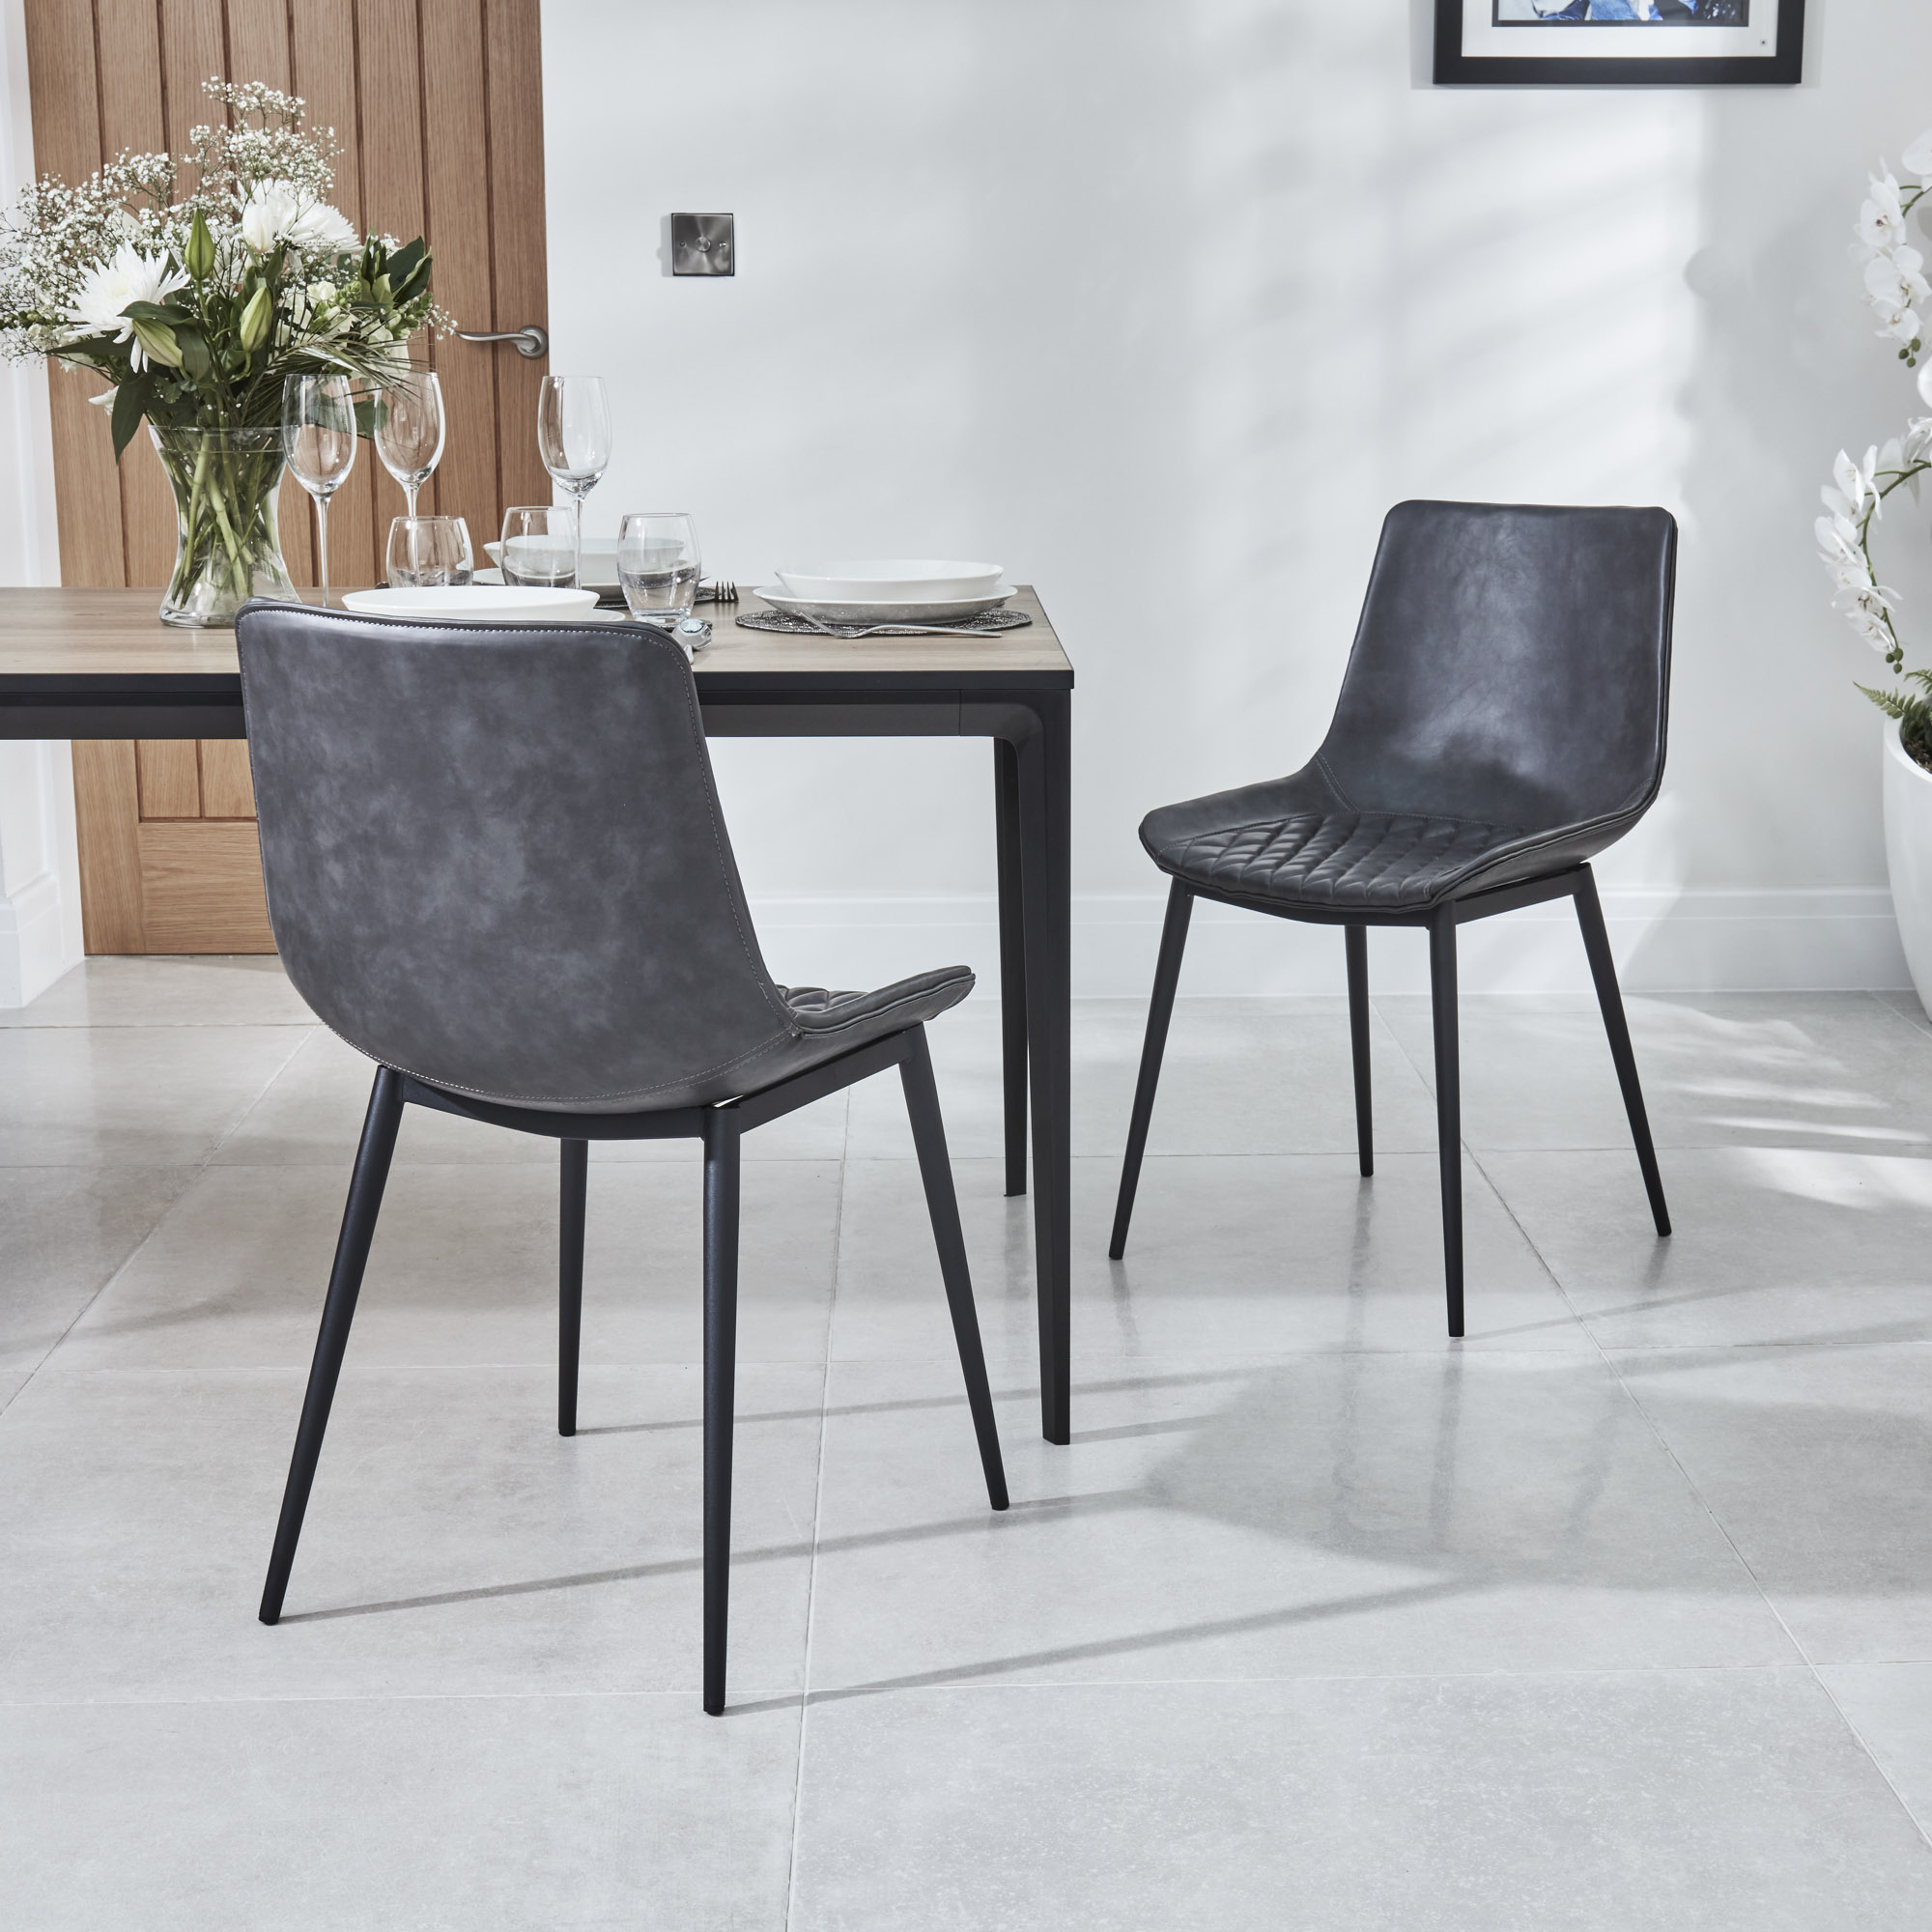 Bellagio 90cm Square White Sintered Stone Dining Table with 4 x Leo Grey Dining Chairs